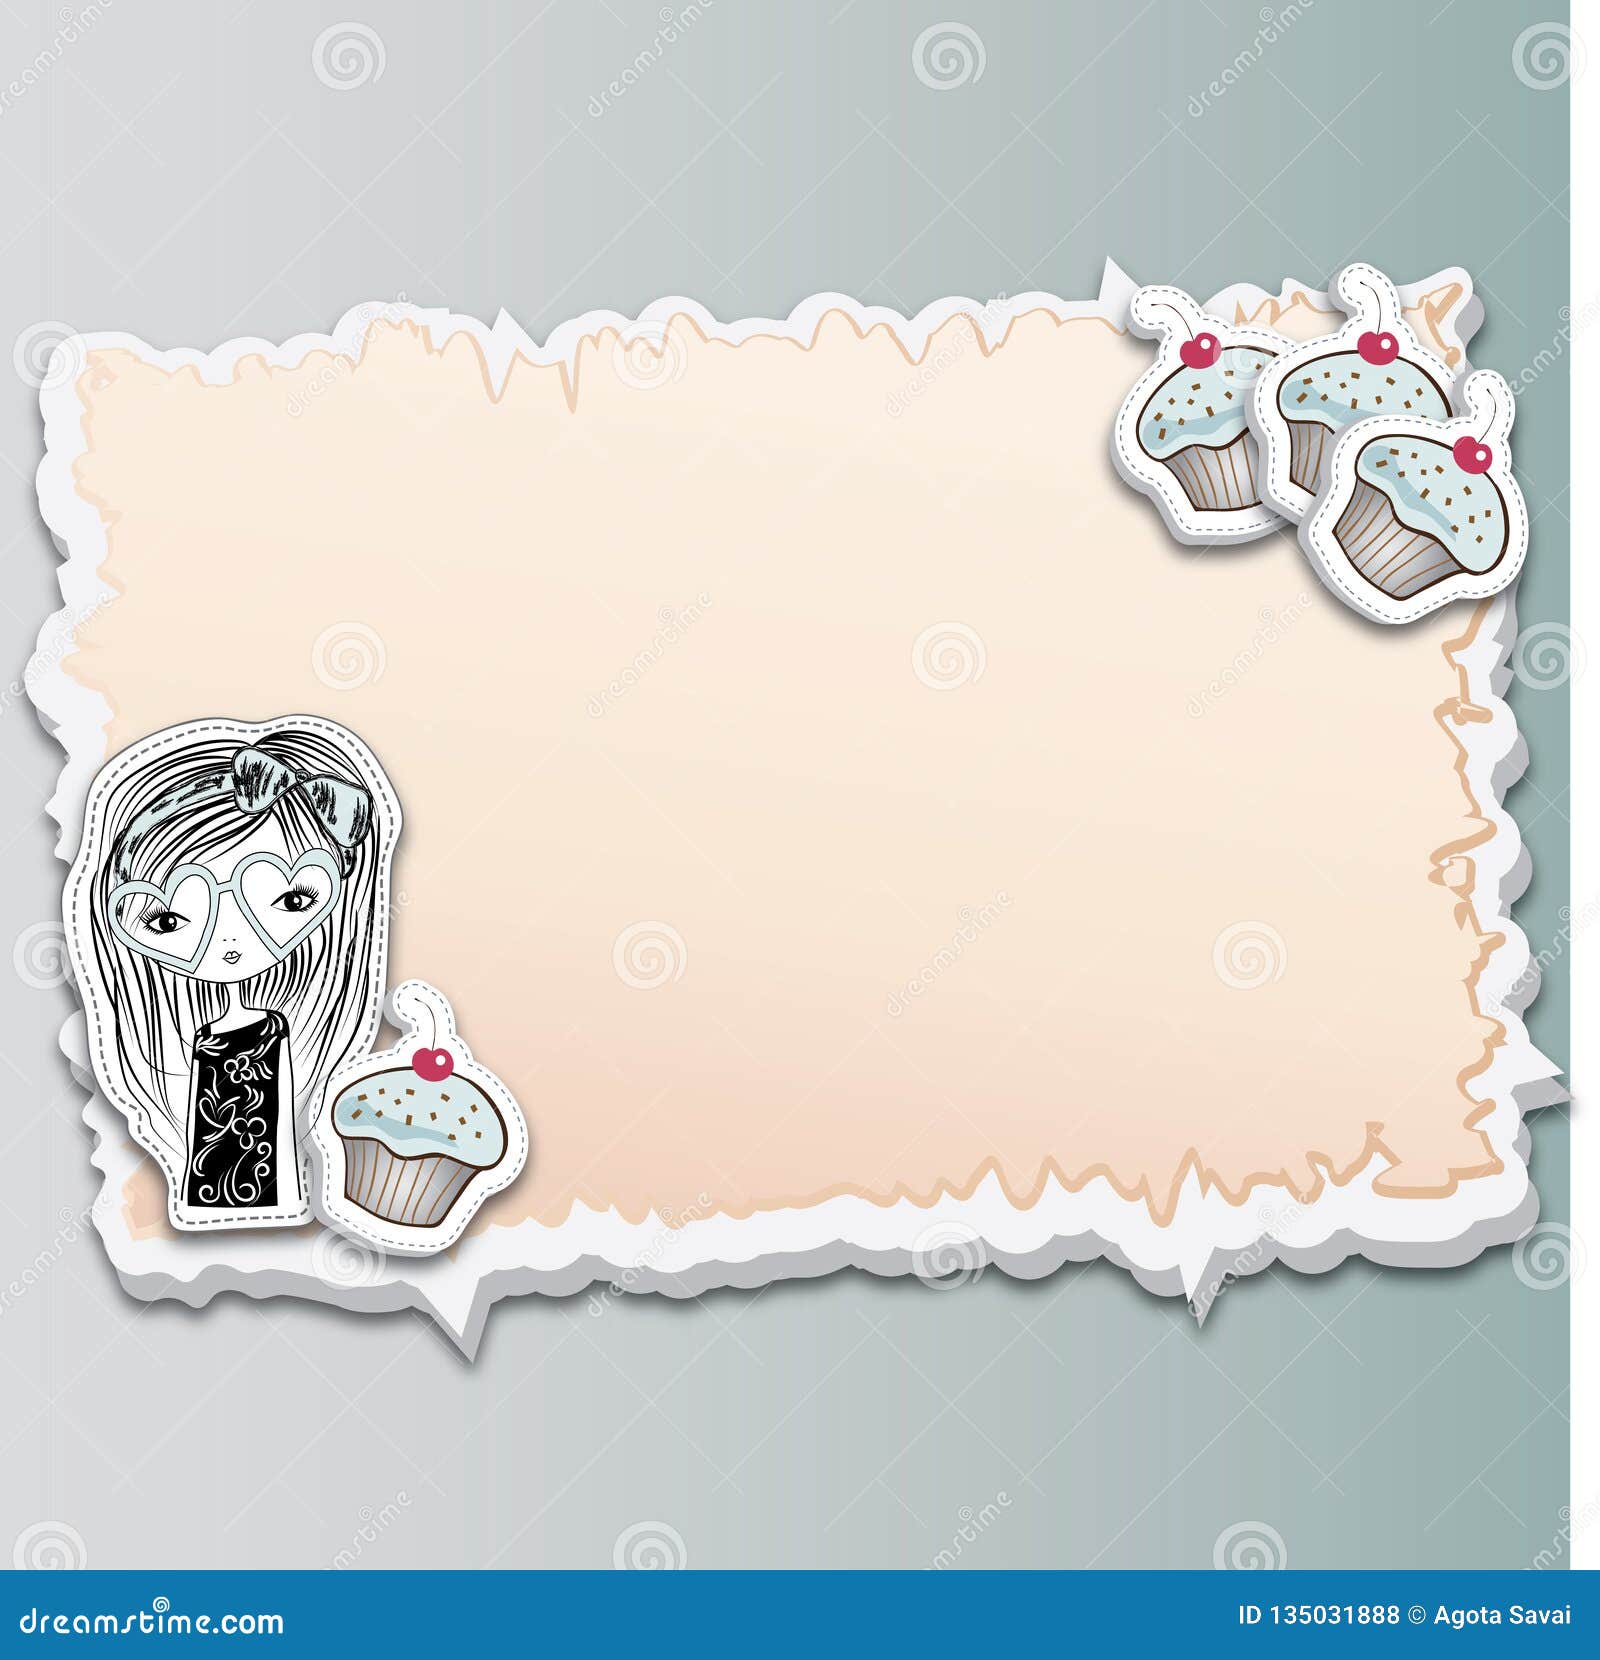 Cake Card Templates in Frame. Cupcake and Girly Girl Hand Drawn For Headband Card Template